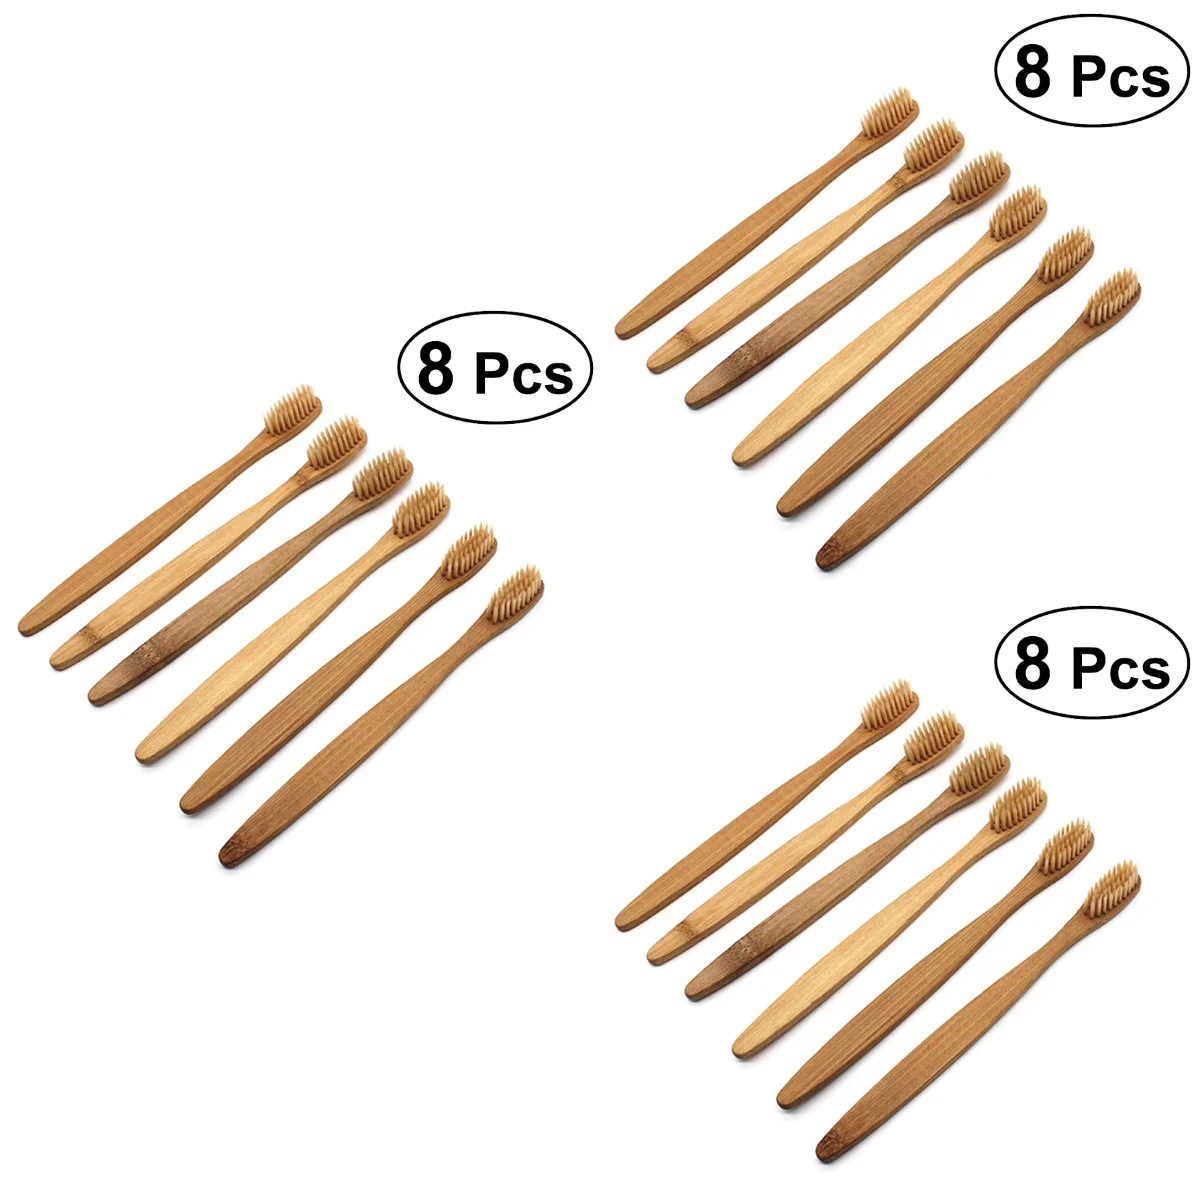 

Wooden Toothbrushes Brush: 24pcs Biodegradable Toothbrushes Natural Wood Friendly